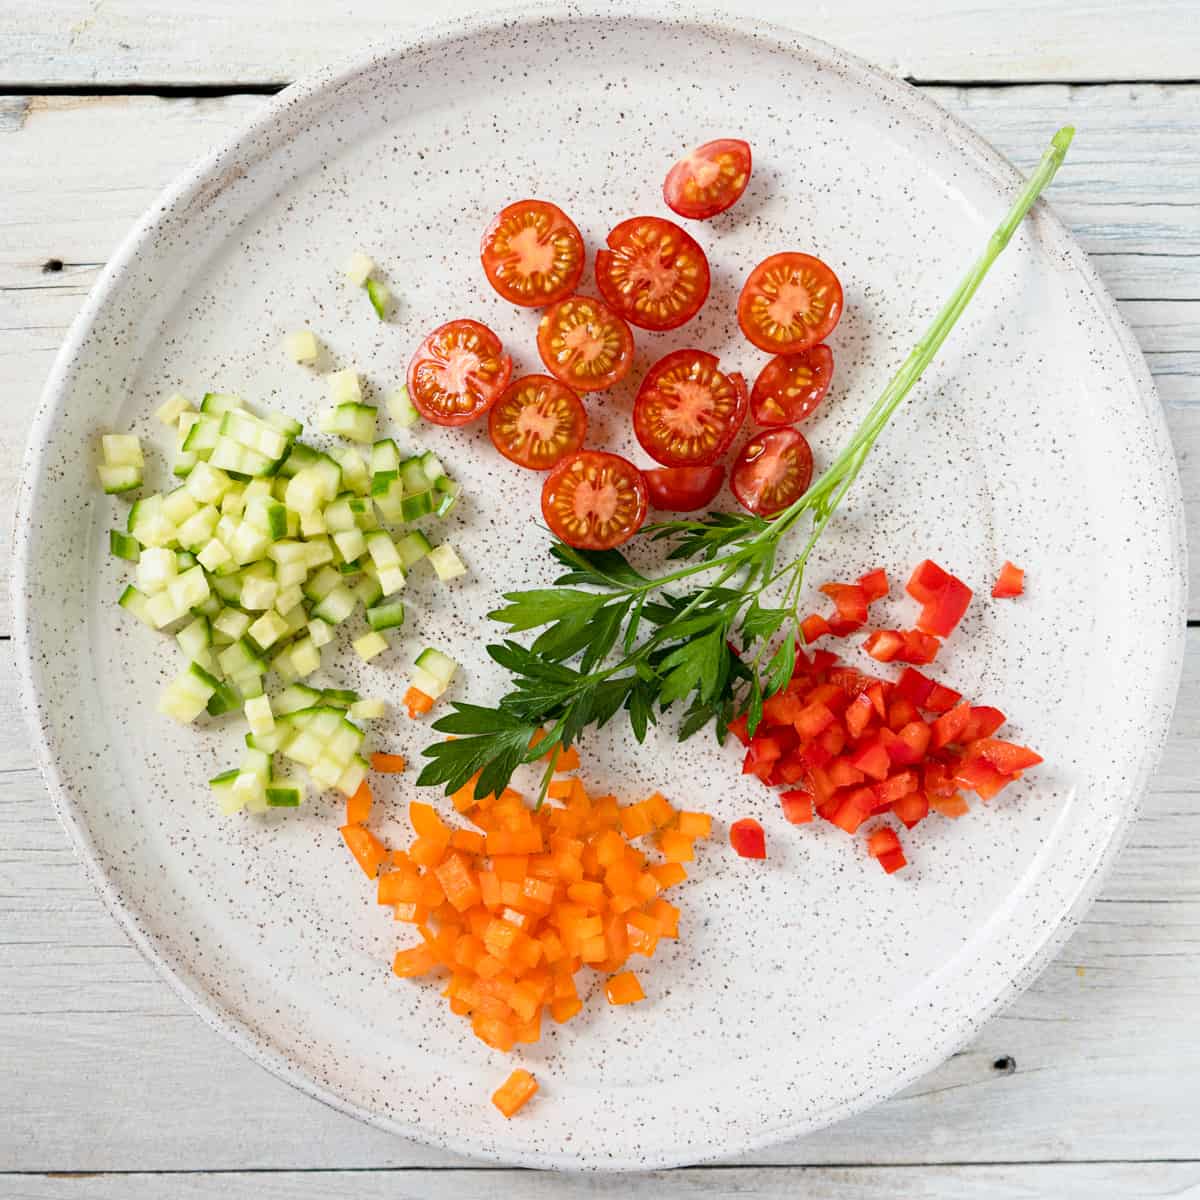 finely diced cucumber and pepper with halved cherry tomatoes and parsley for garnishing soup.